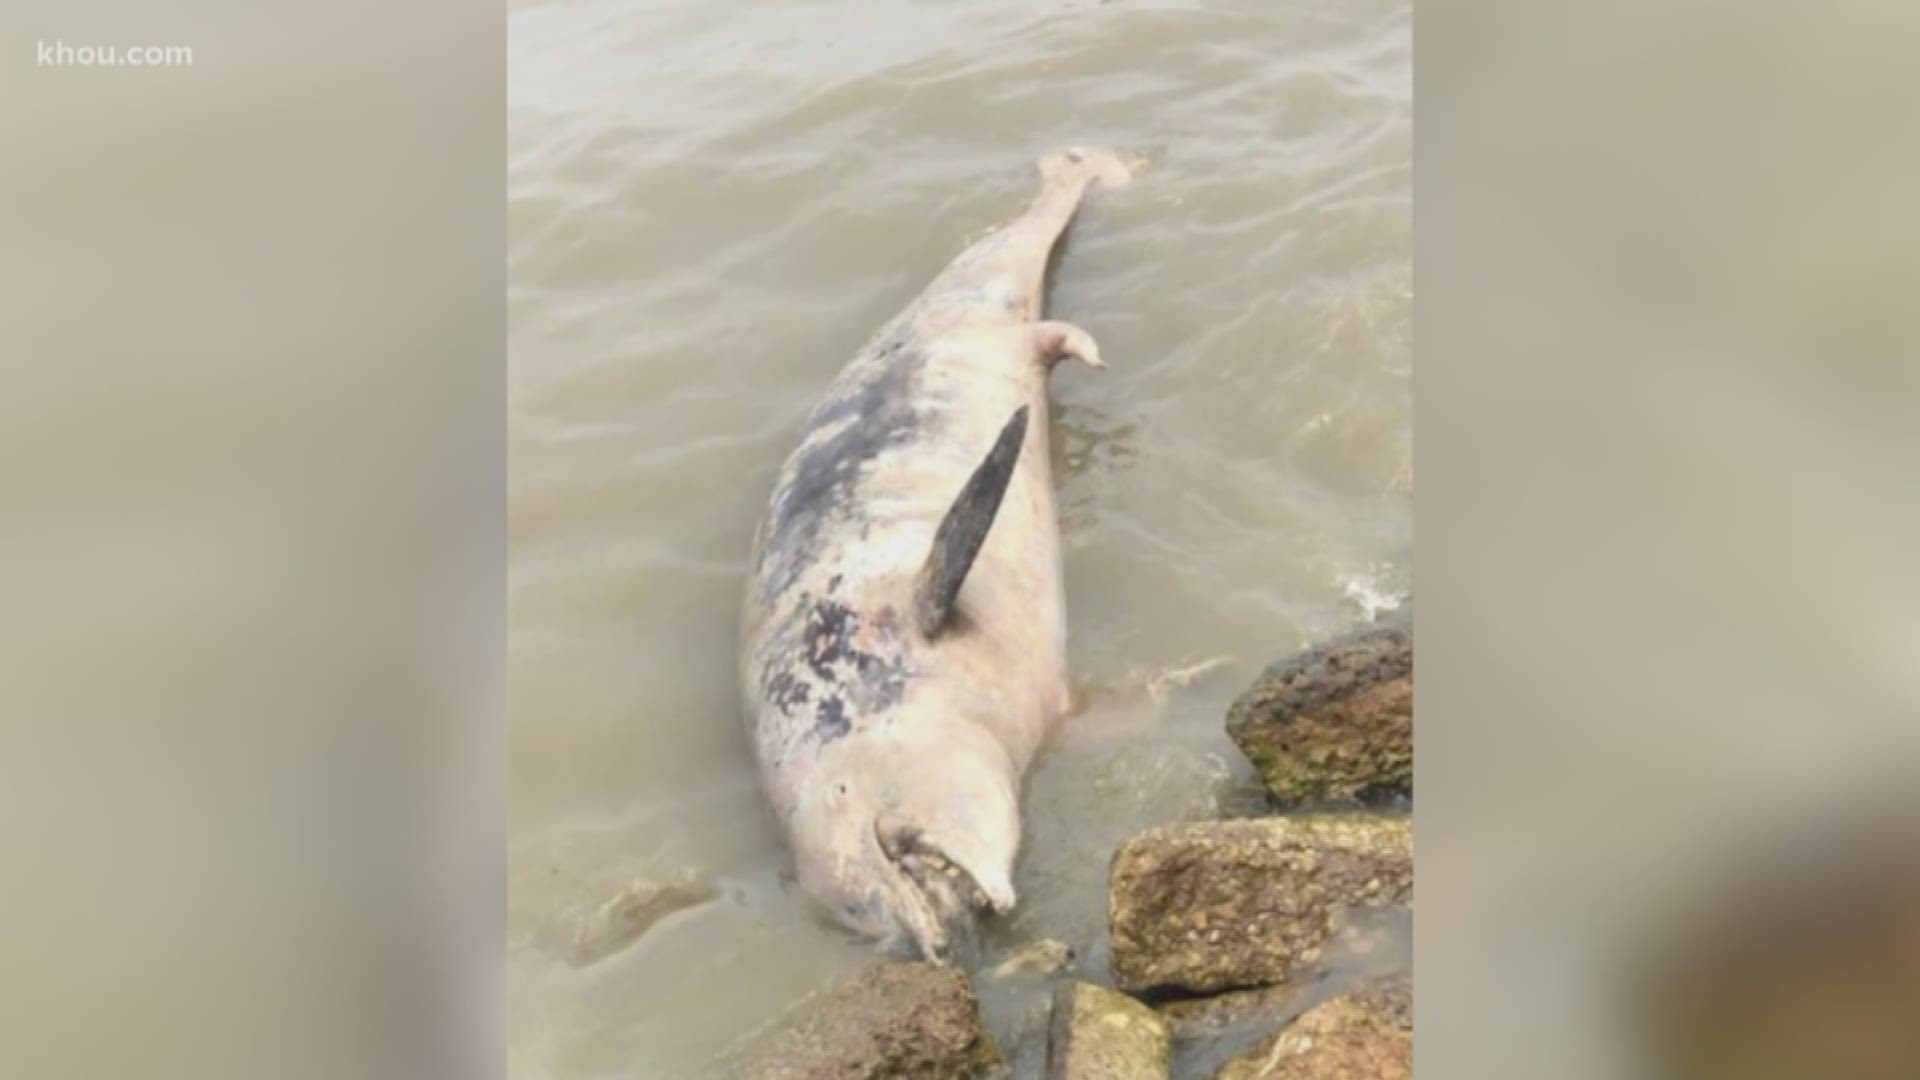 Volunteers have found hundreds of dead animals recently on the east end of Galveston island, according to the Galveston County Daily News.

The volunteers monitor island coastal wildlife and say they have found hundreds of dead fish, about 100 dead birds, dead sea turtles and dolphins.